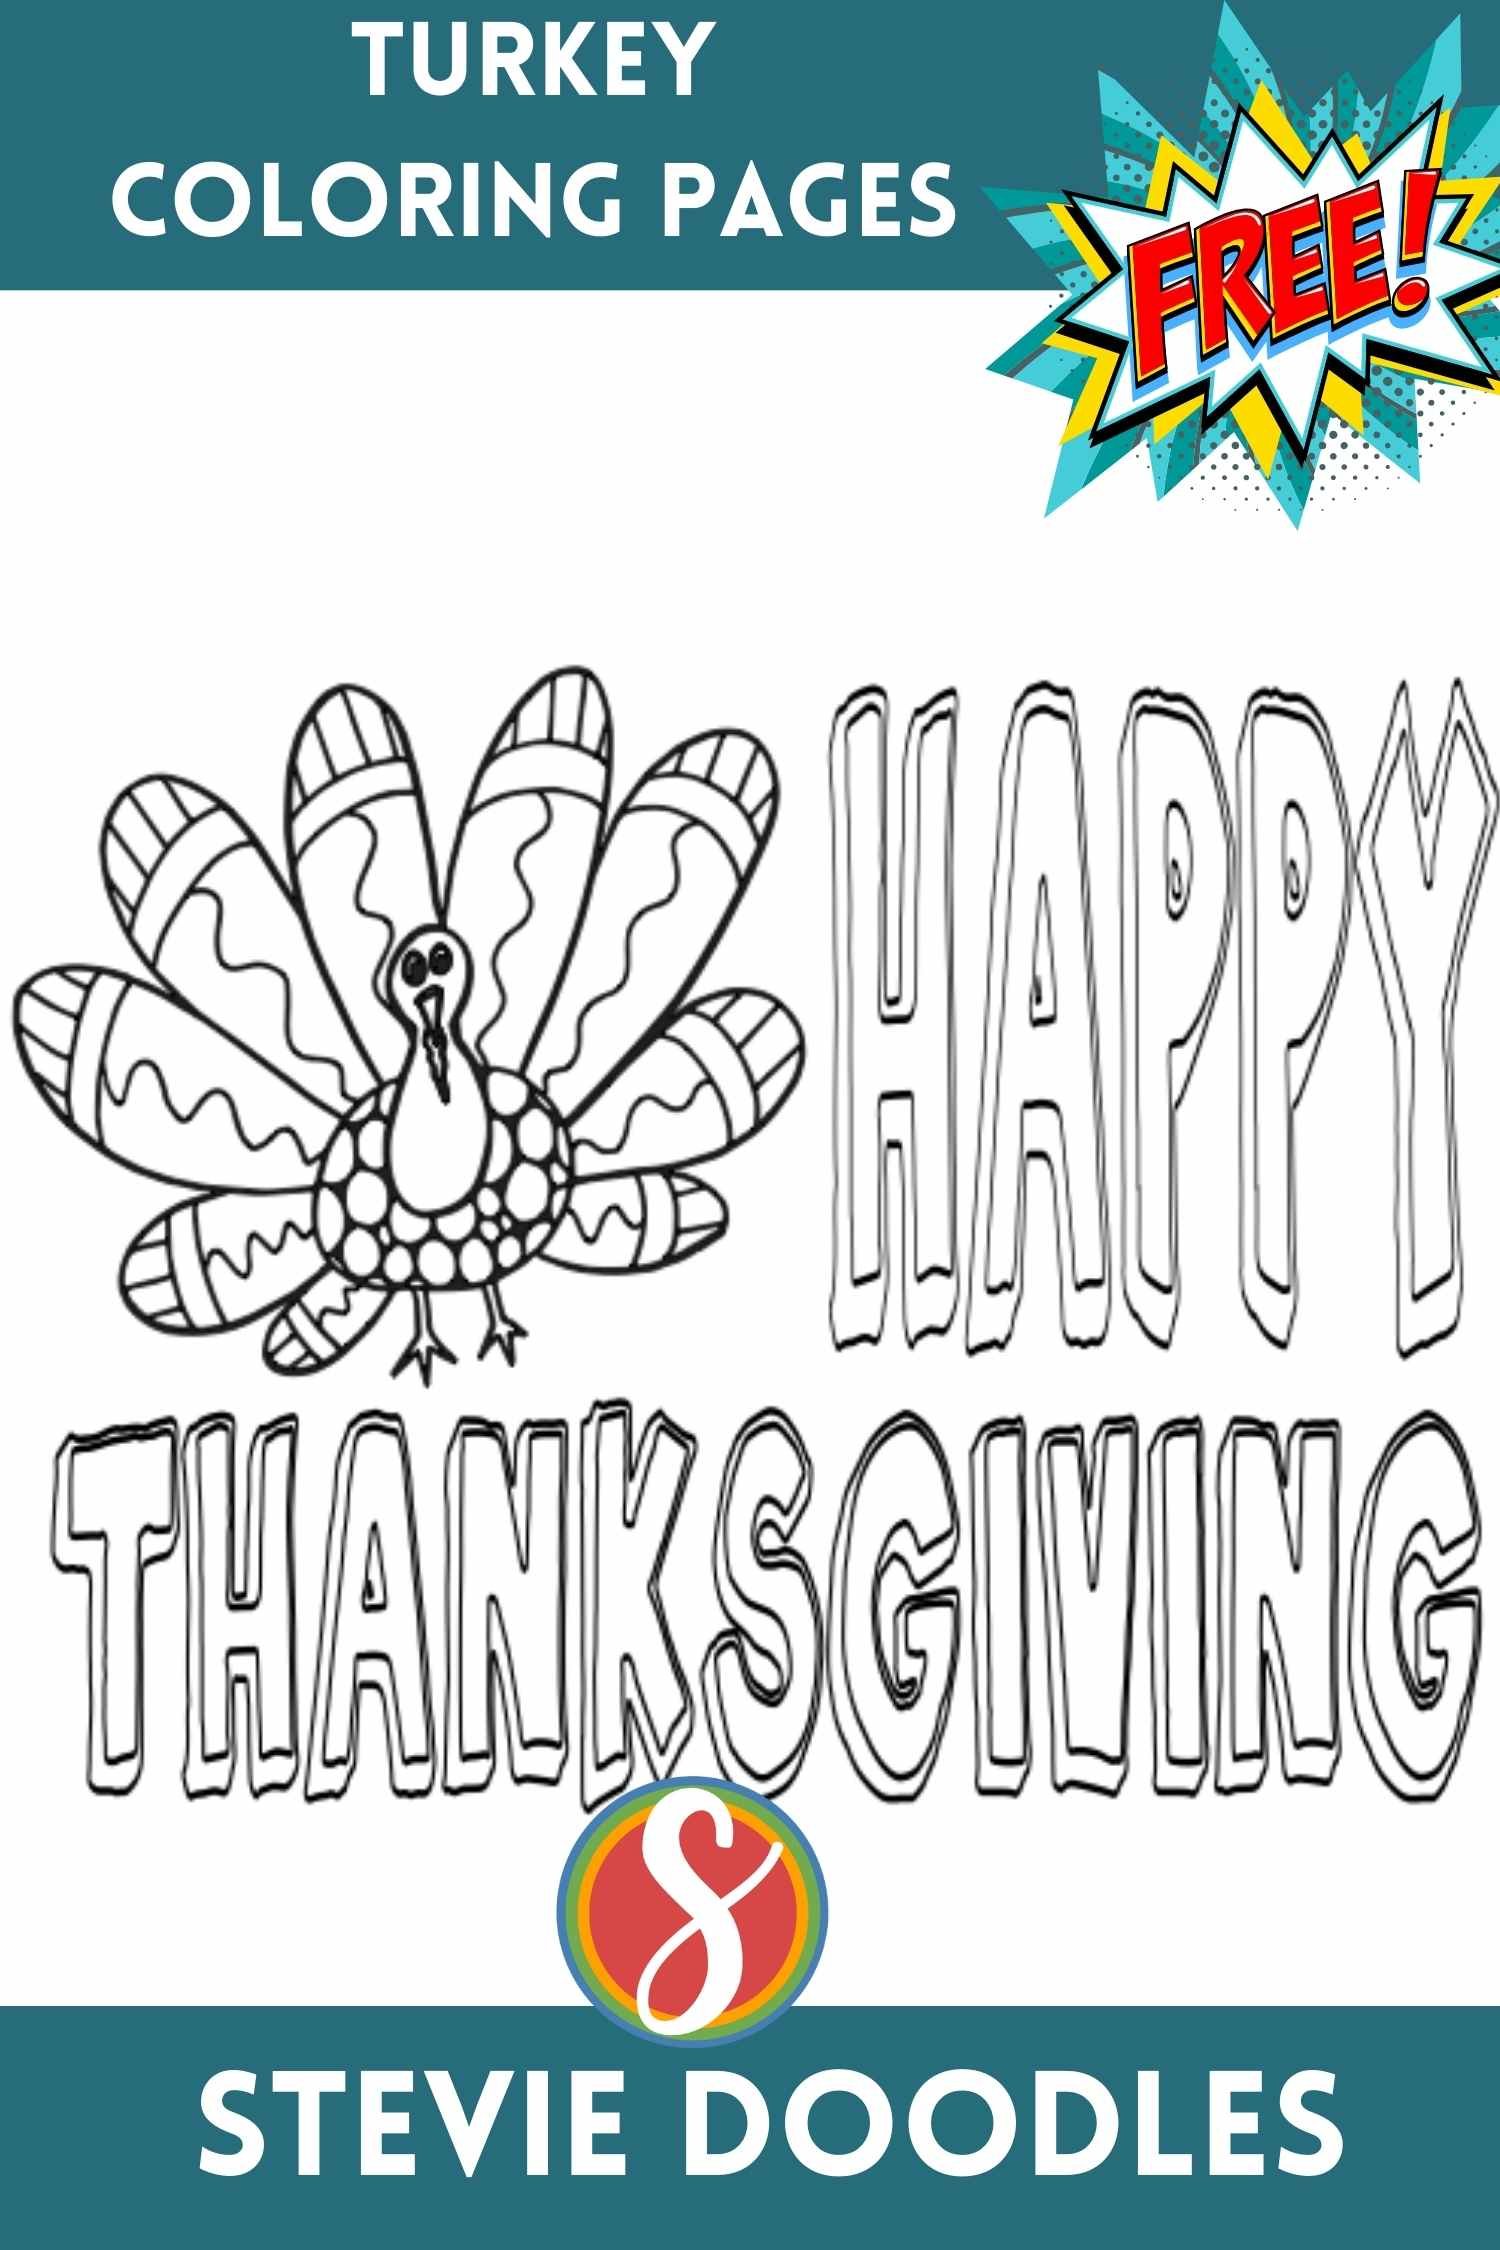 big colorable words "Happy Thanksgiving" with small doodle-filled turkey